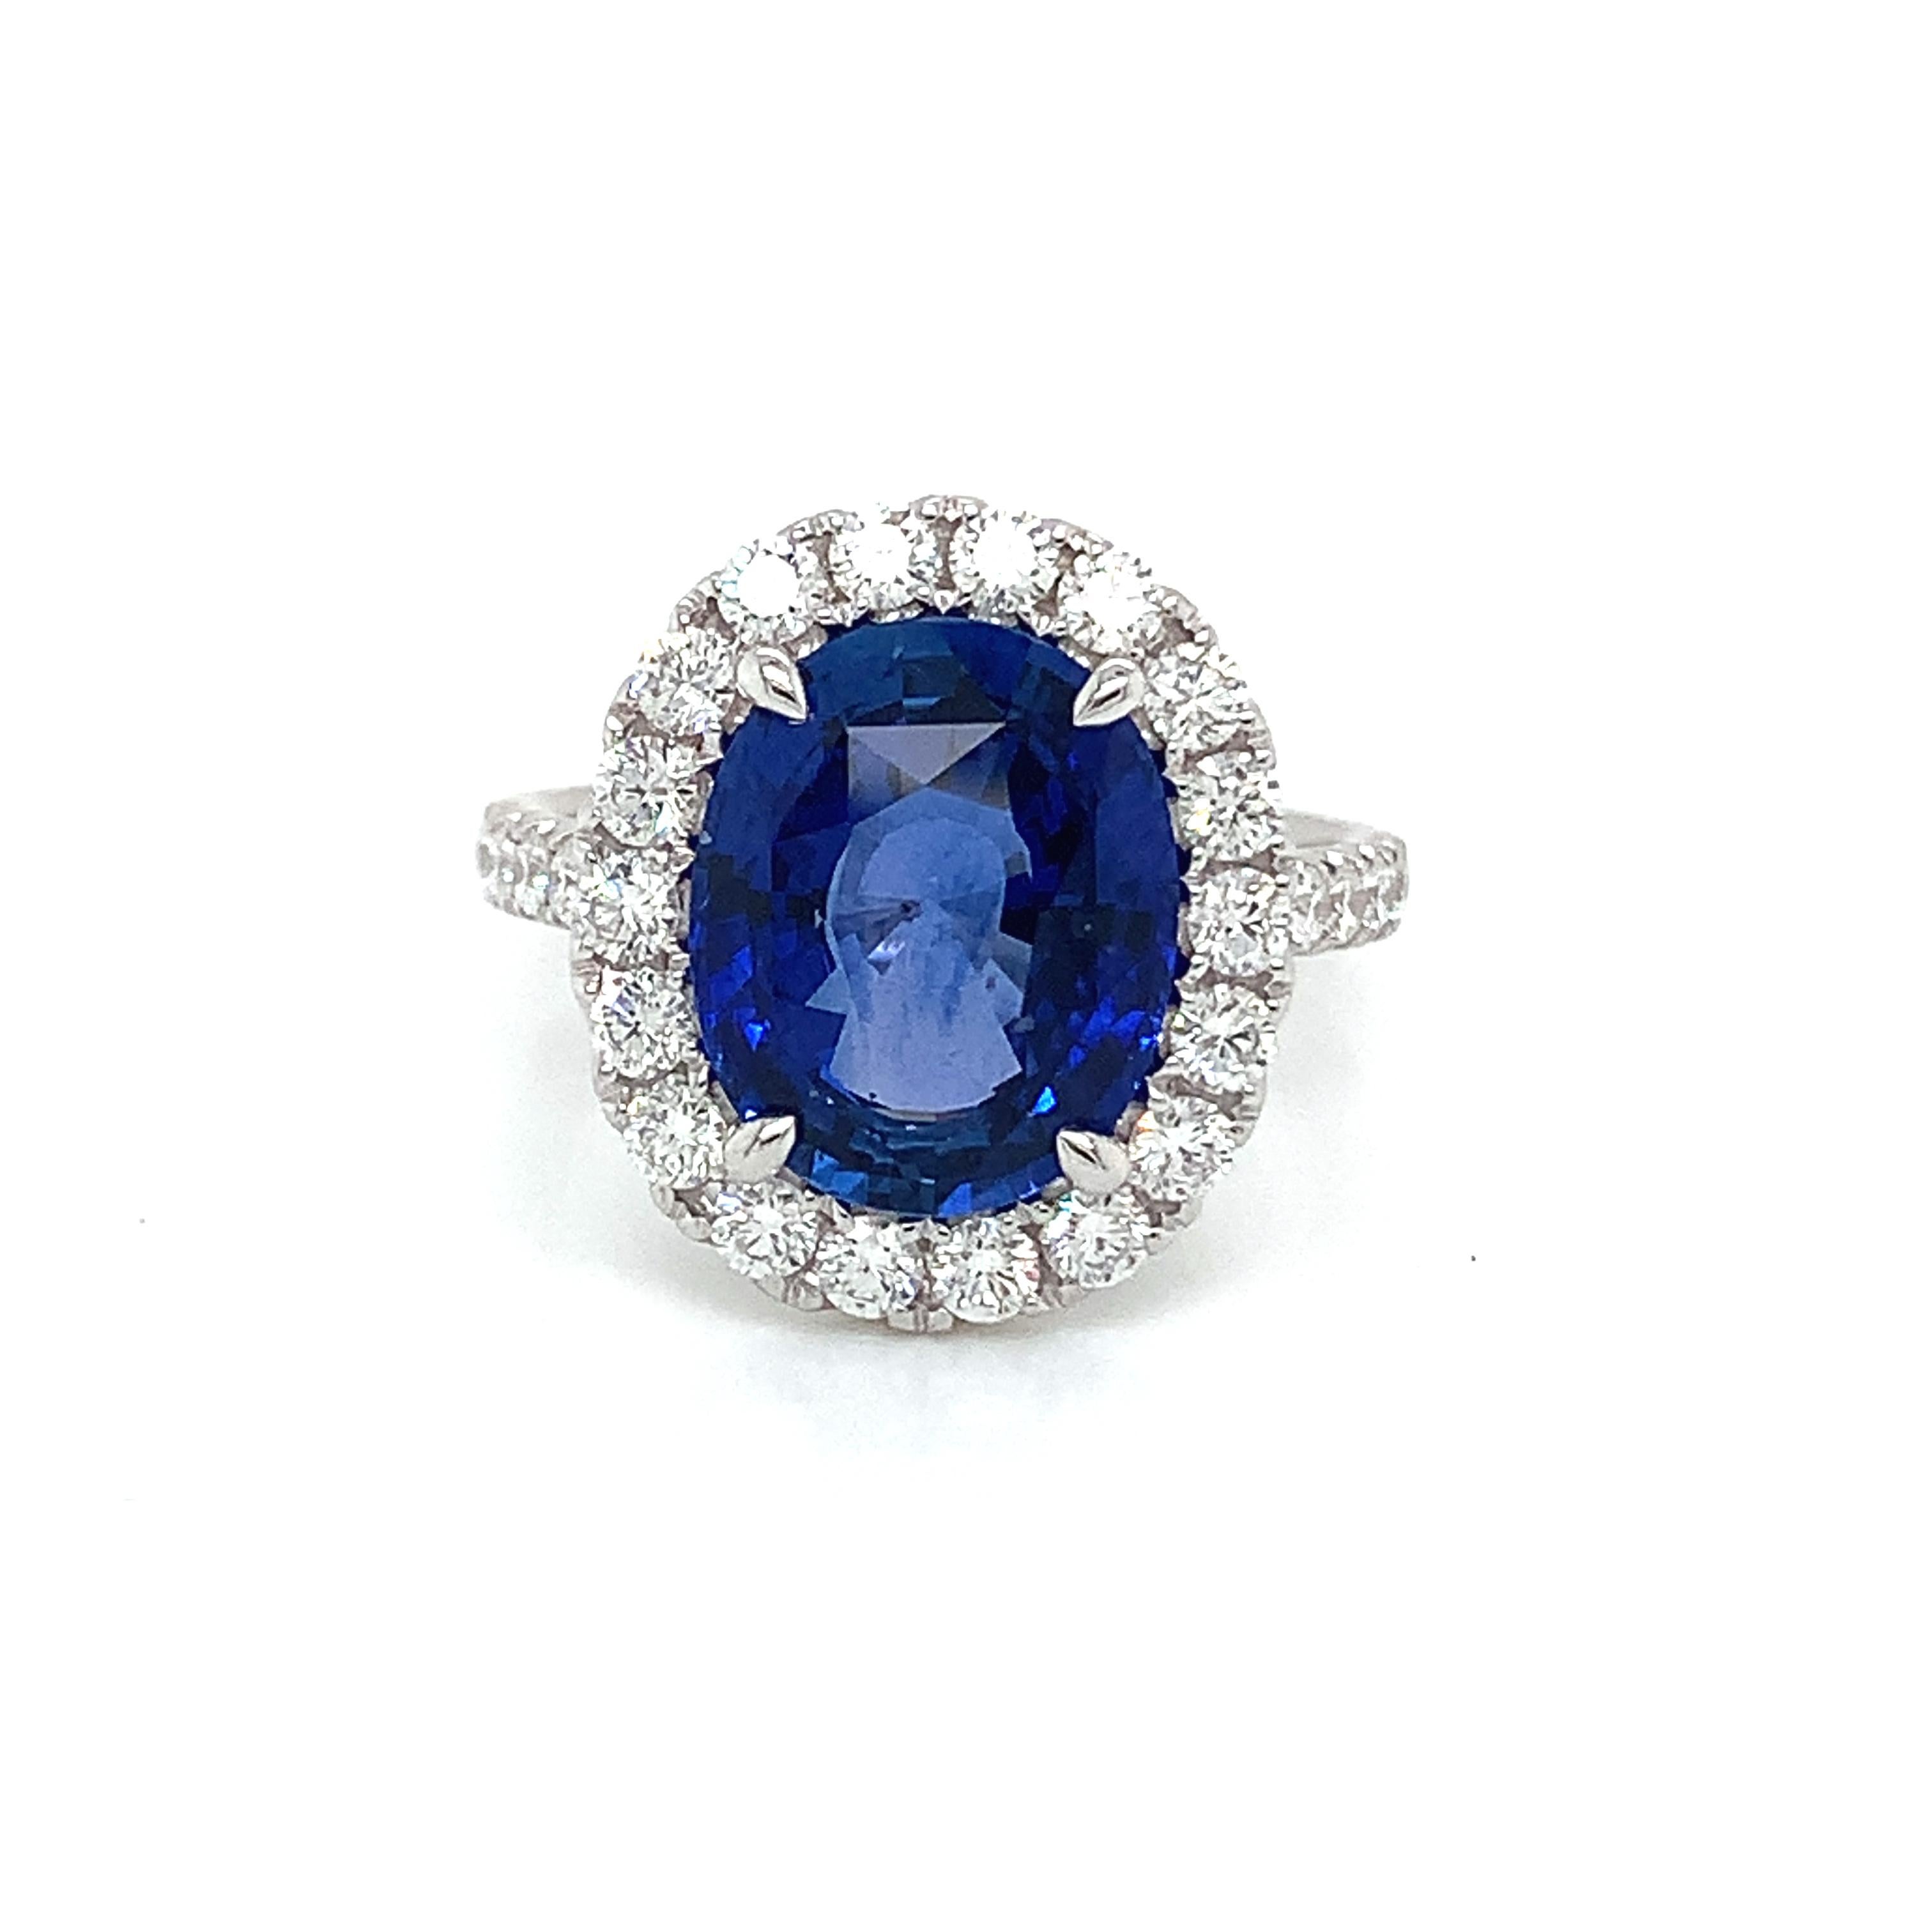 GIA oval Ceylon sapphire weighing 5.47 cts
Measuring (12.02x9.77x5.54) mm
Round diamonds weighing .93 cts
Set in 18k white gold ring
5.41 grams